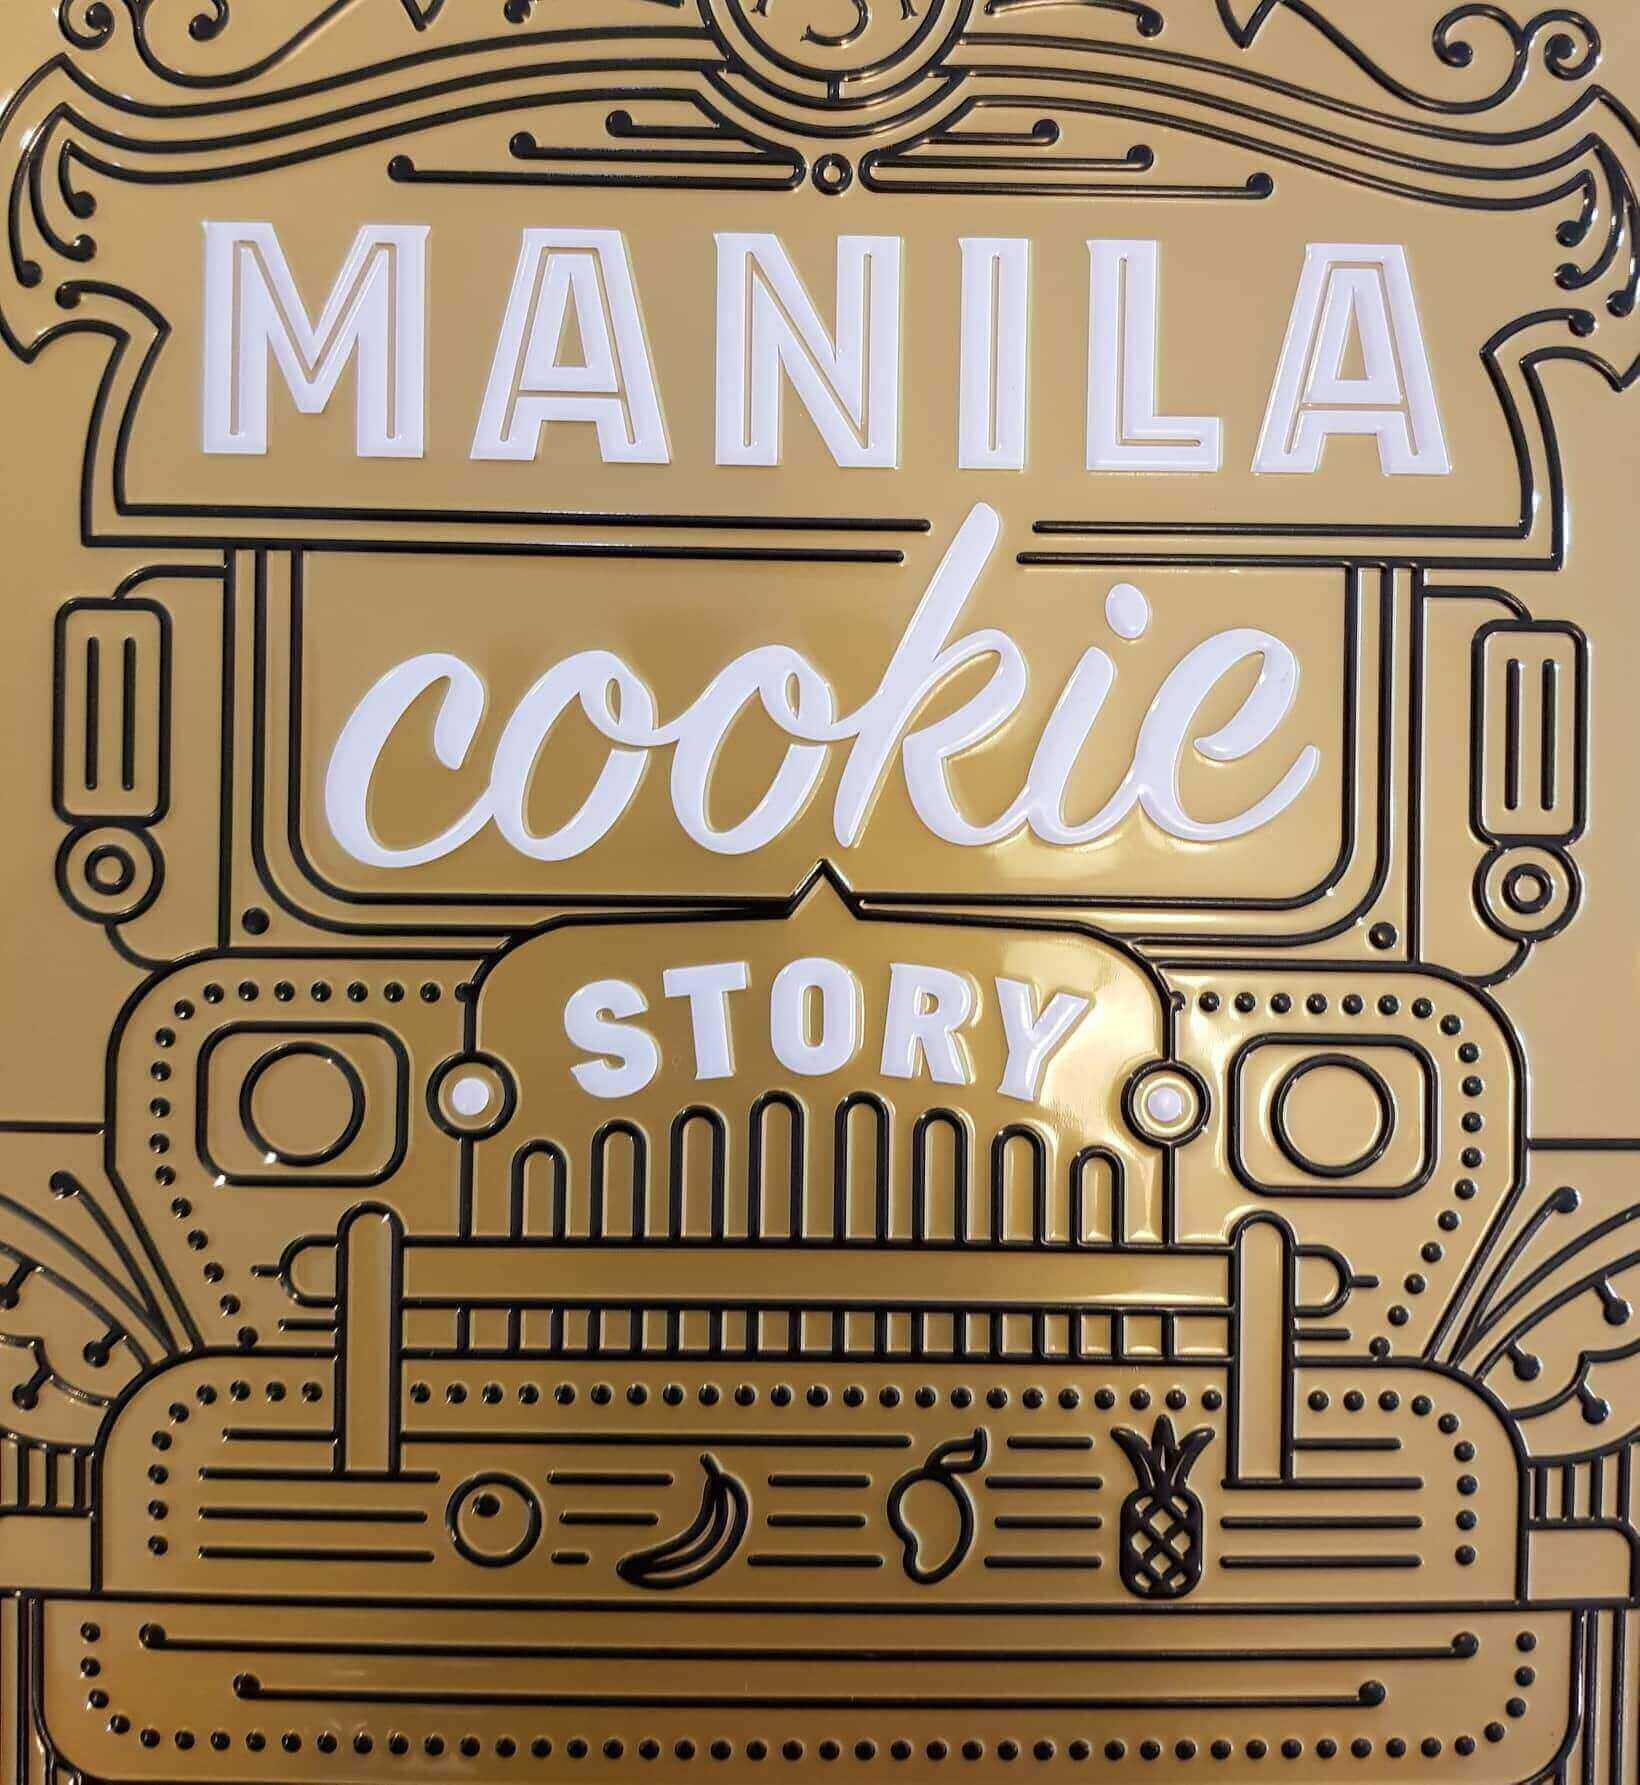 Manila Cookie Story Is Amazingly Delicious (5)